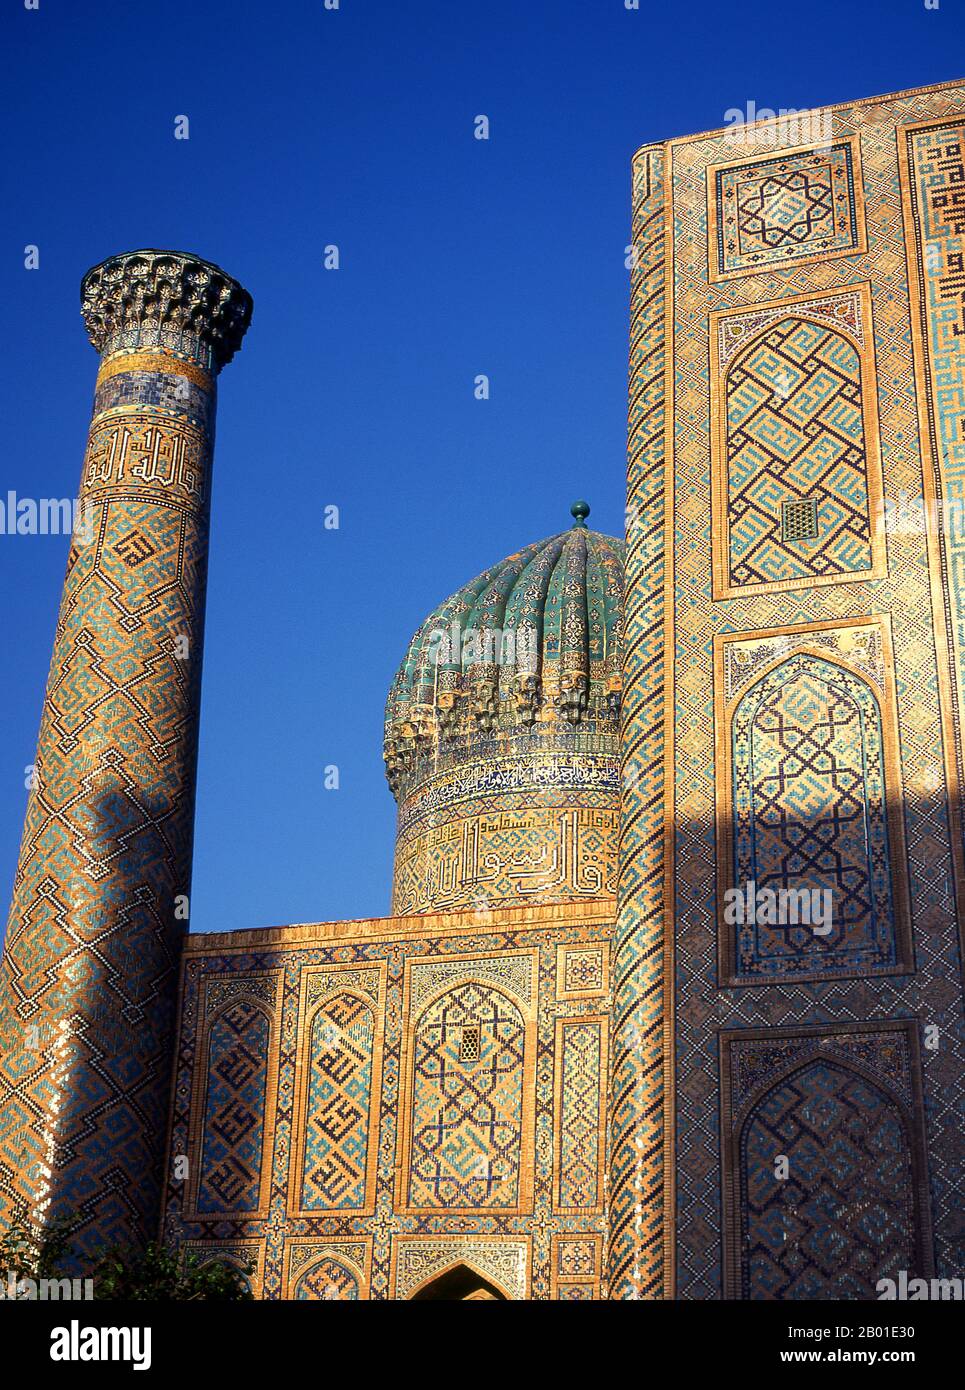 Uzbekistan: Minaret, fluted dome and portico at Sher Dor Madrassa, The Registan, Samarkand.  The Registan contains three madrasahs (schools), the Ulugh Beg Madrasah (1417–1420), Tilya-Kori Madrasah (1646–1660) and the Sher-Dor Madrasah (1619–1636).  In the 17th century the ruler of Samarkand Yalangtush Bakhodur ordered the construction of the Sher-Dor and Tillya-Kori madrasahs. The Sher-Dor (Having Tigers) Madrasah was designed by architect Abdujabor. The decoration of the madrasah is not as refined as that found on 15th century architecture, Samarkand's 'golden age'. Stock Photo